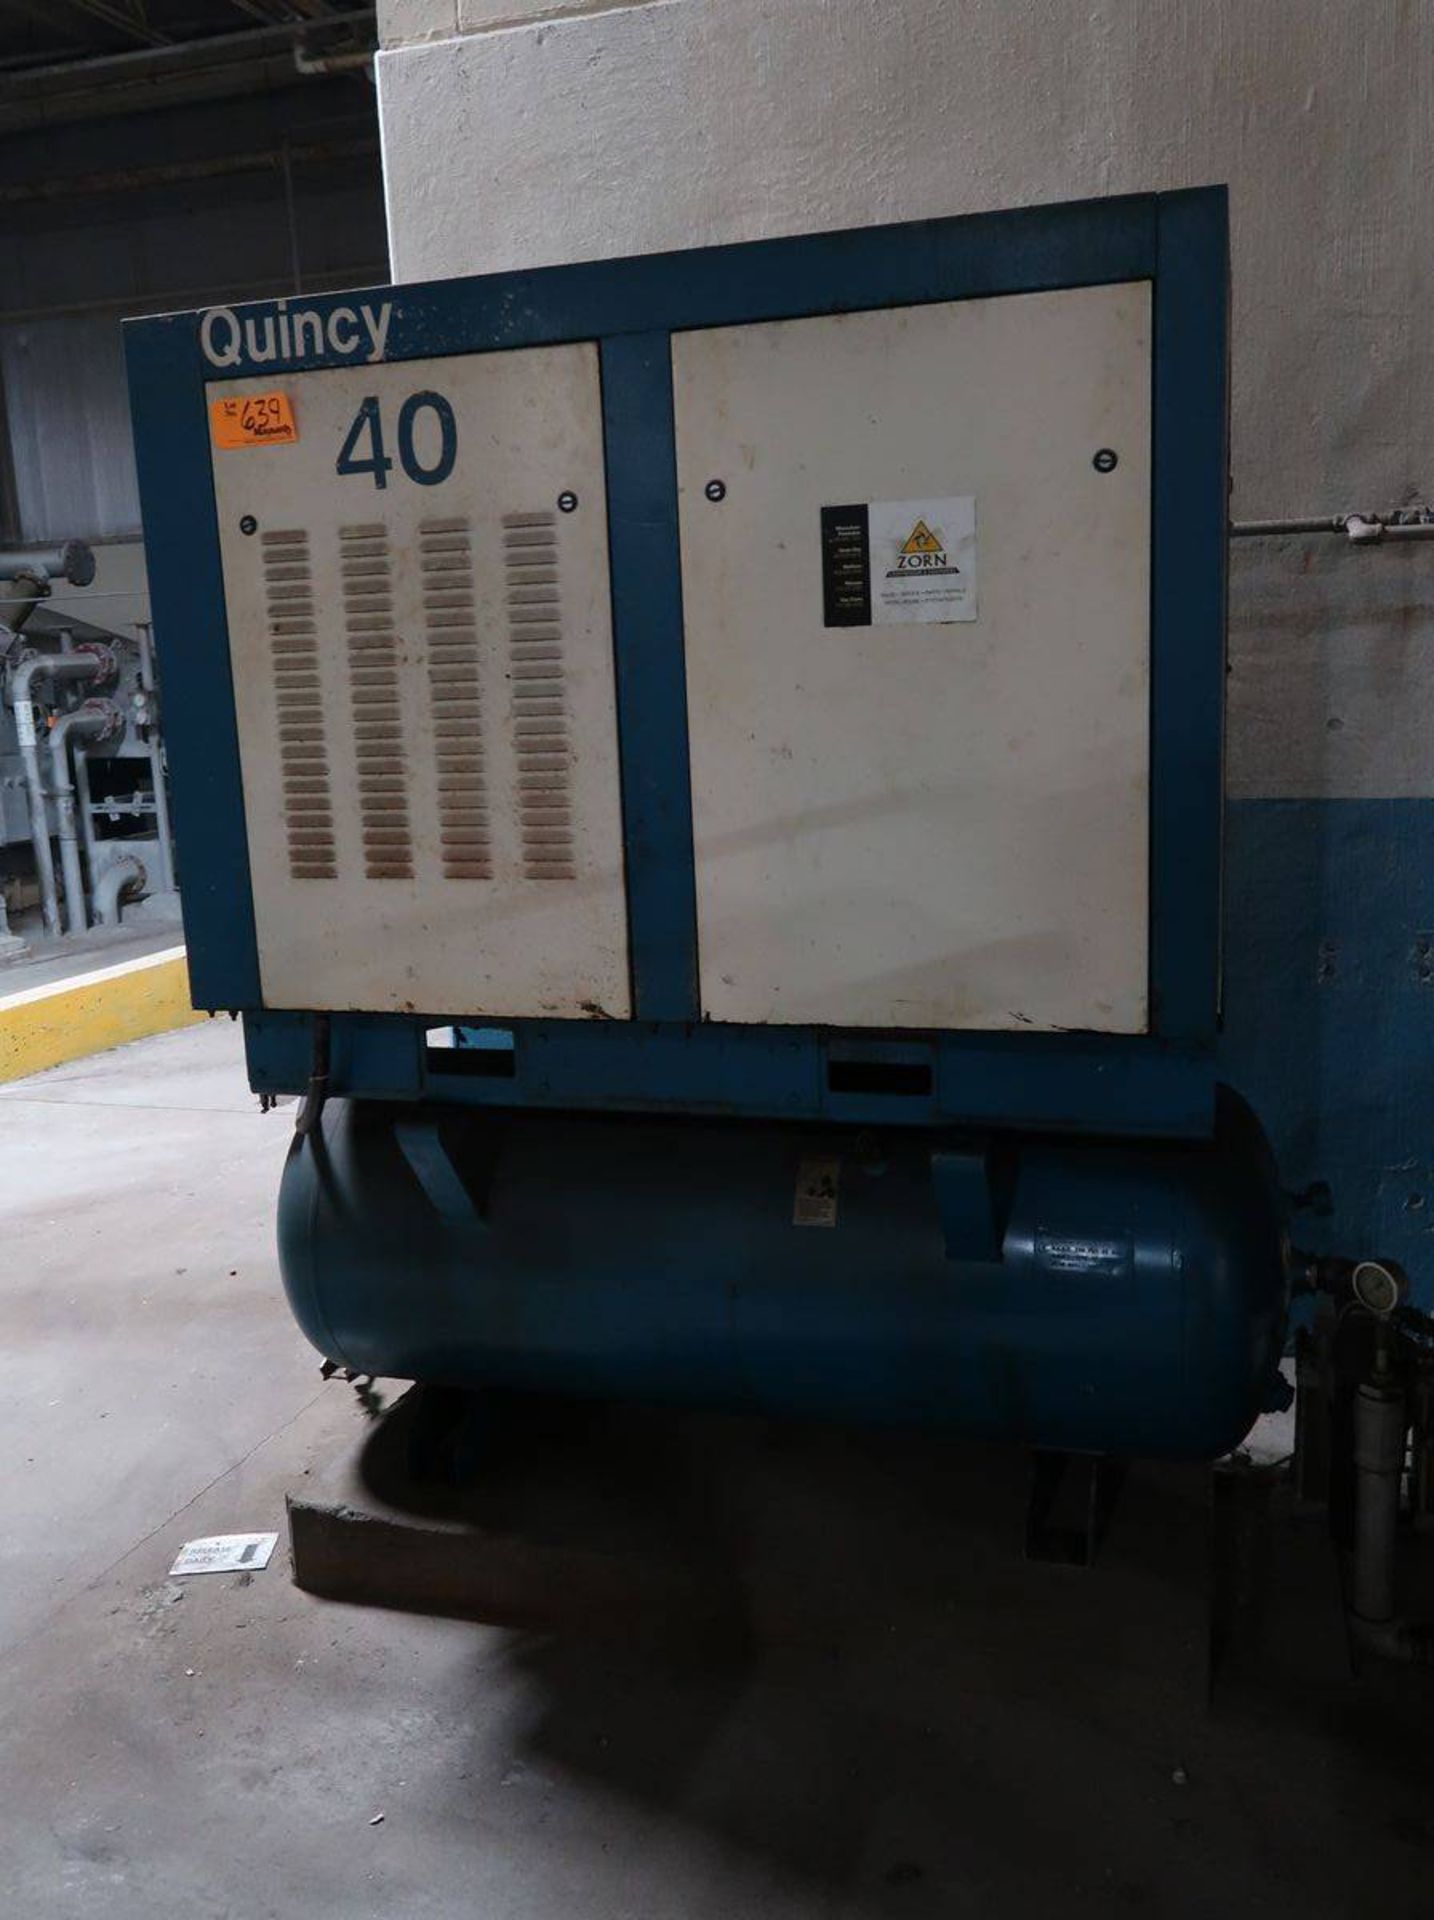 1992 Quincy 40 Rotary Screw Compressor - Image 2 of 4